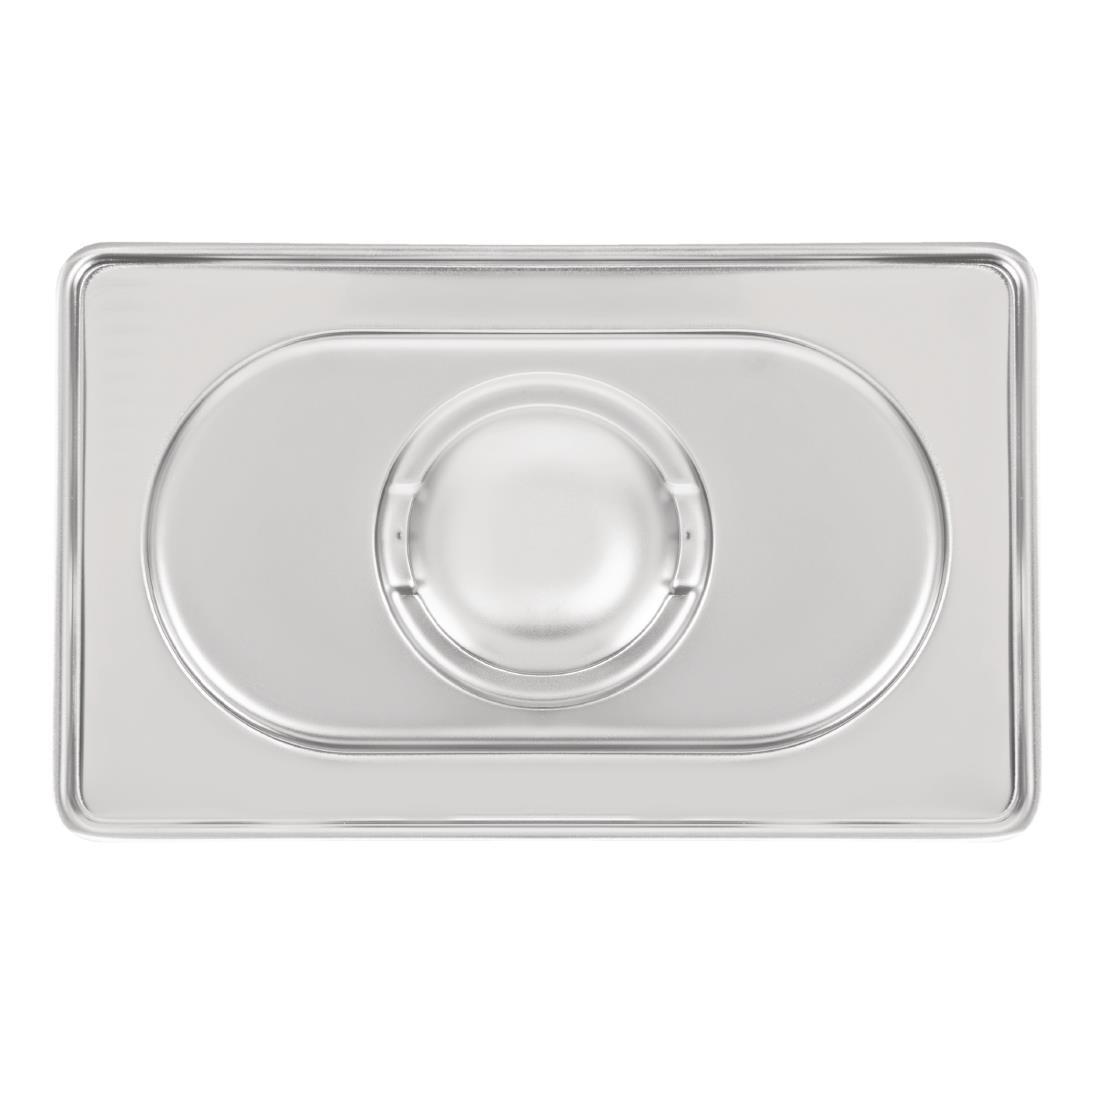 Vogue Heavy Duty Stainless Steel 1/9 Gastronorm Pan Lid - DW460  - 5